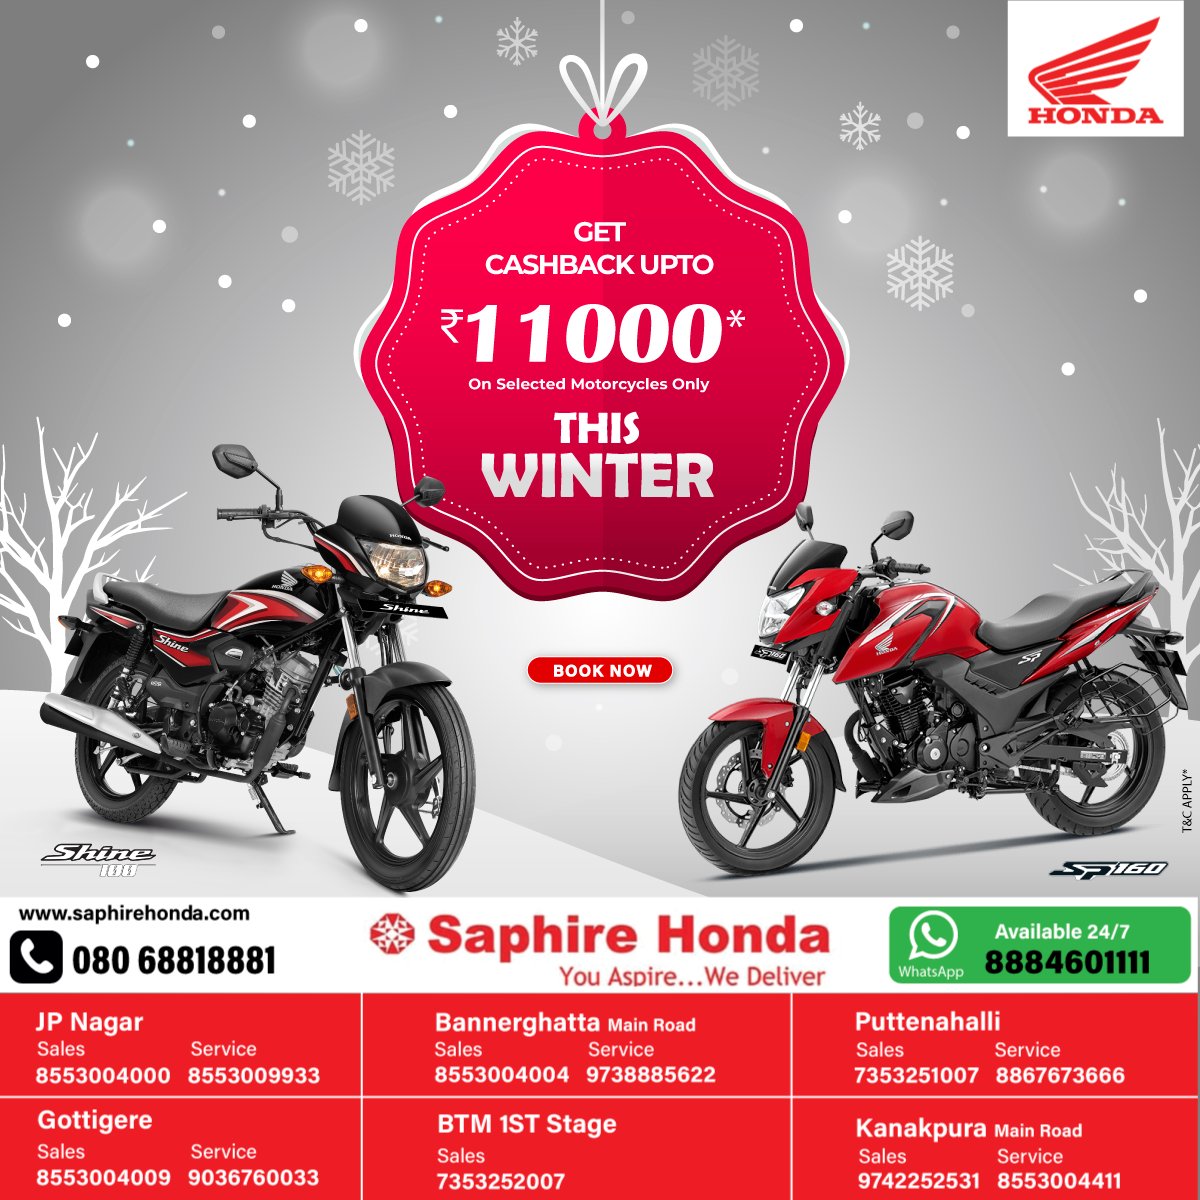 Winter Offers!
Embrace the joy of the season by purchasing any #HondaShine or #HondaSP160 and enjoy cashback up to ₹11,000* on selected motorcycles. Act now, as this limited-period offer is a golden opportunity to ride in style and save.
Book now!!!